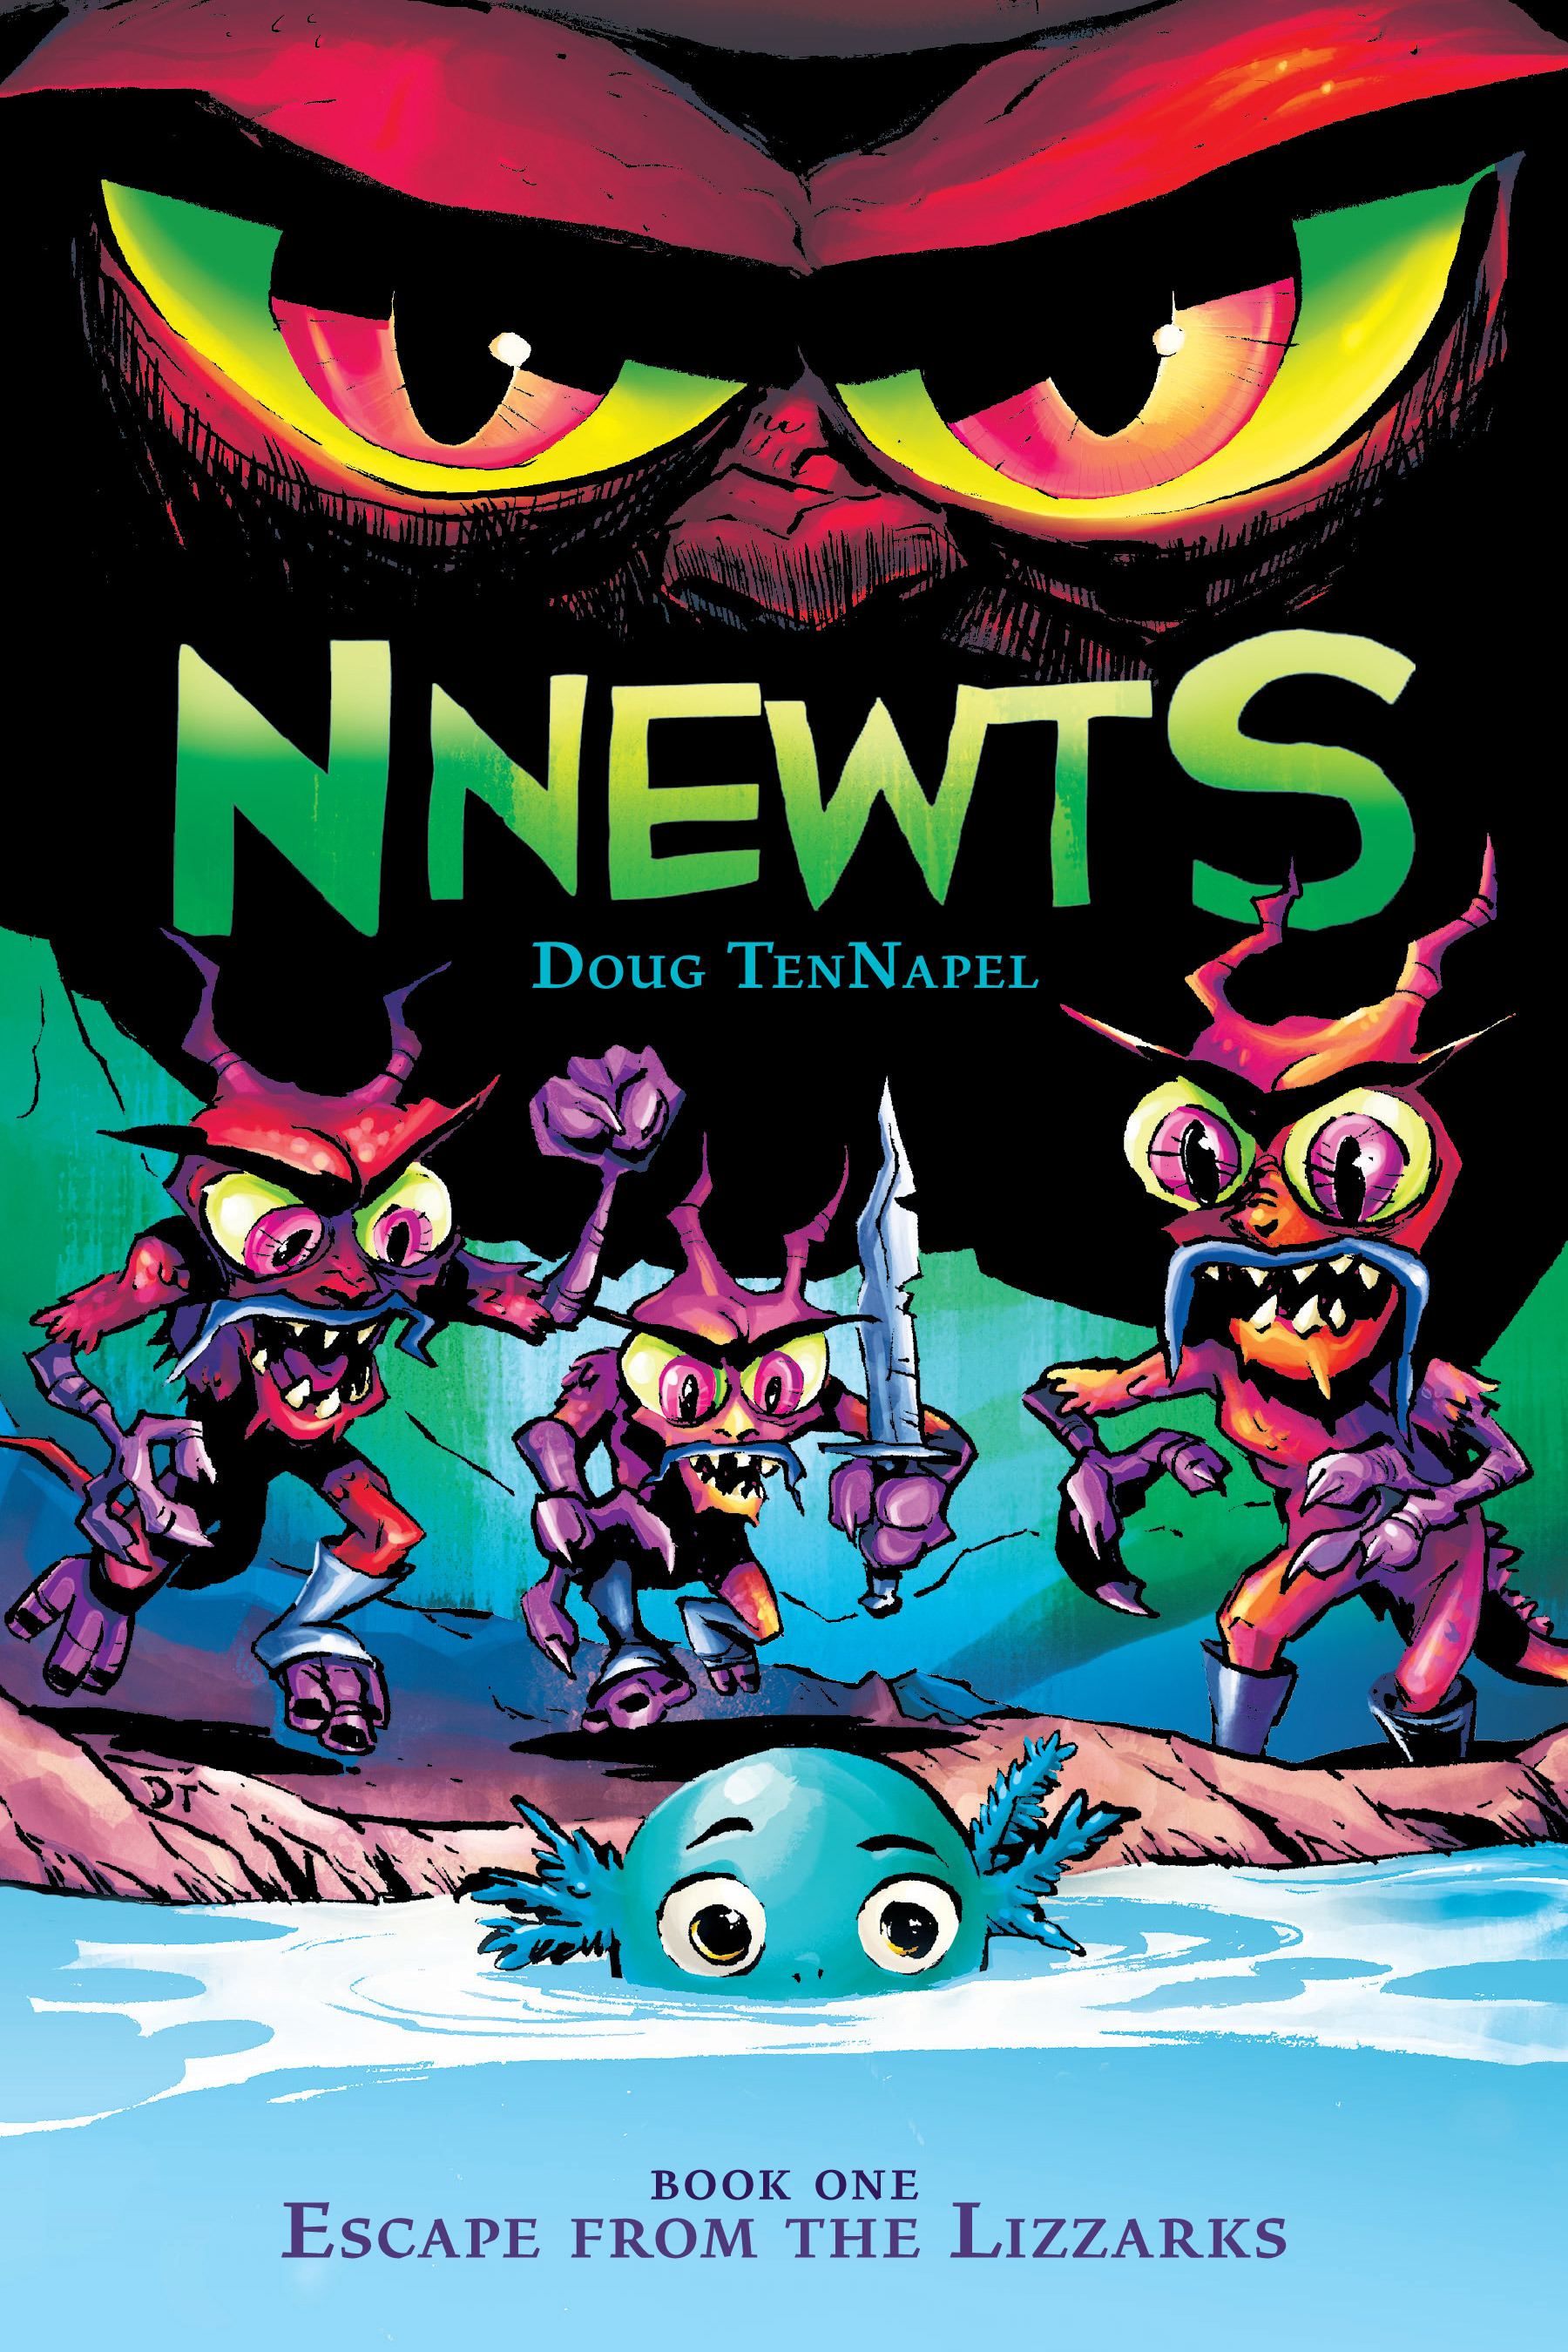 Read online Nnewts comic -  Issue # TPB - 1